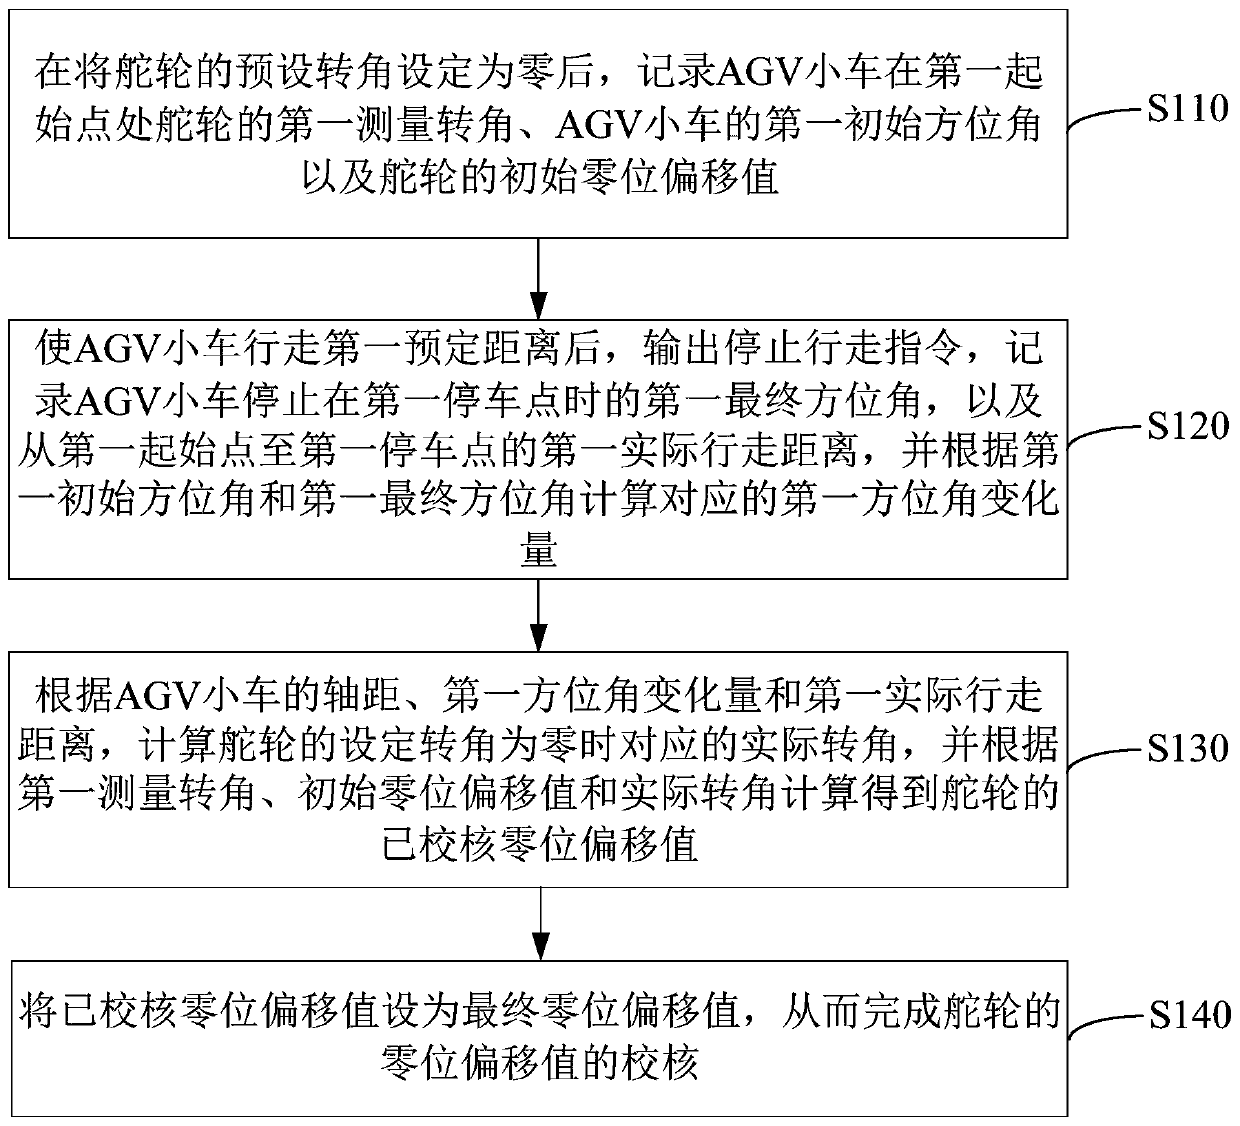 Physical parameter verification method for AGV trolley and AGV trolley